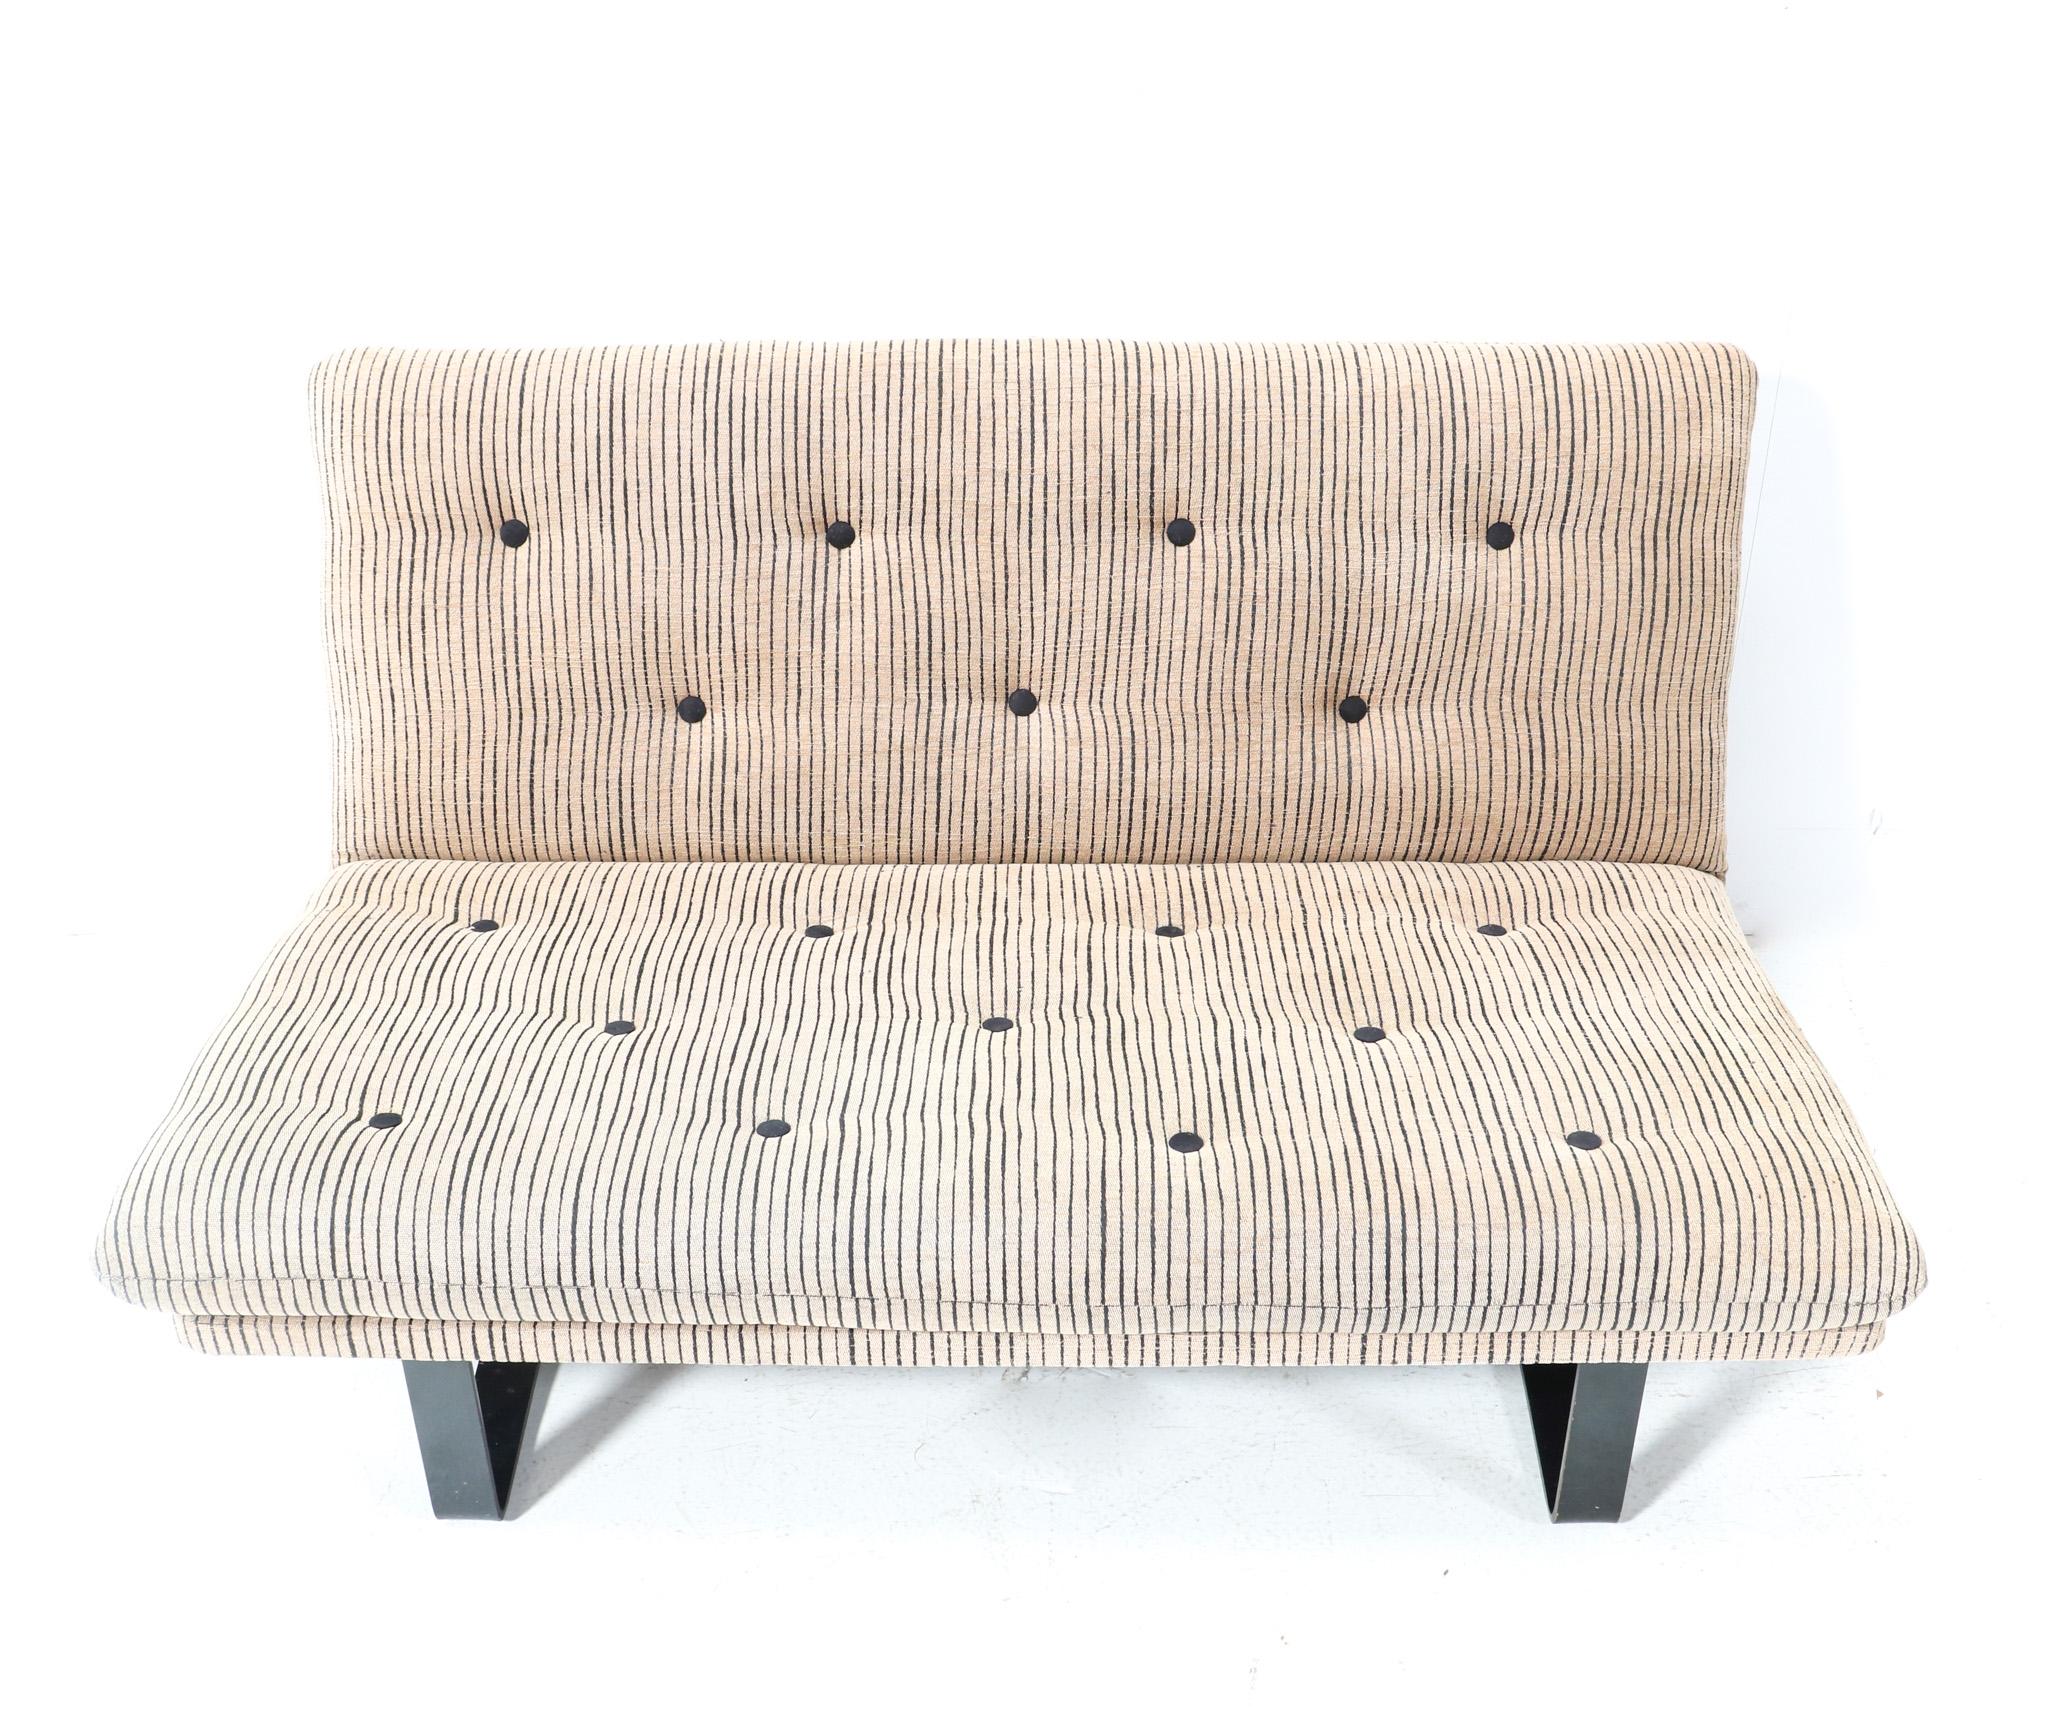 Dutch  Kho Liang Le for Artifort Mid-Century Modern C683 Two-Seater Sofa, 1968 For Sale